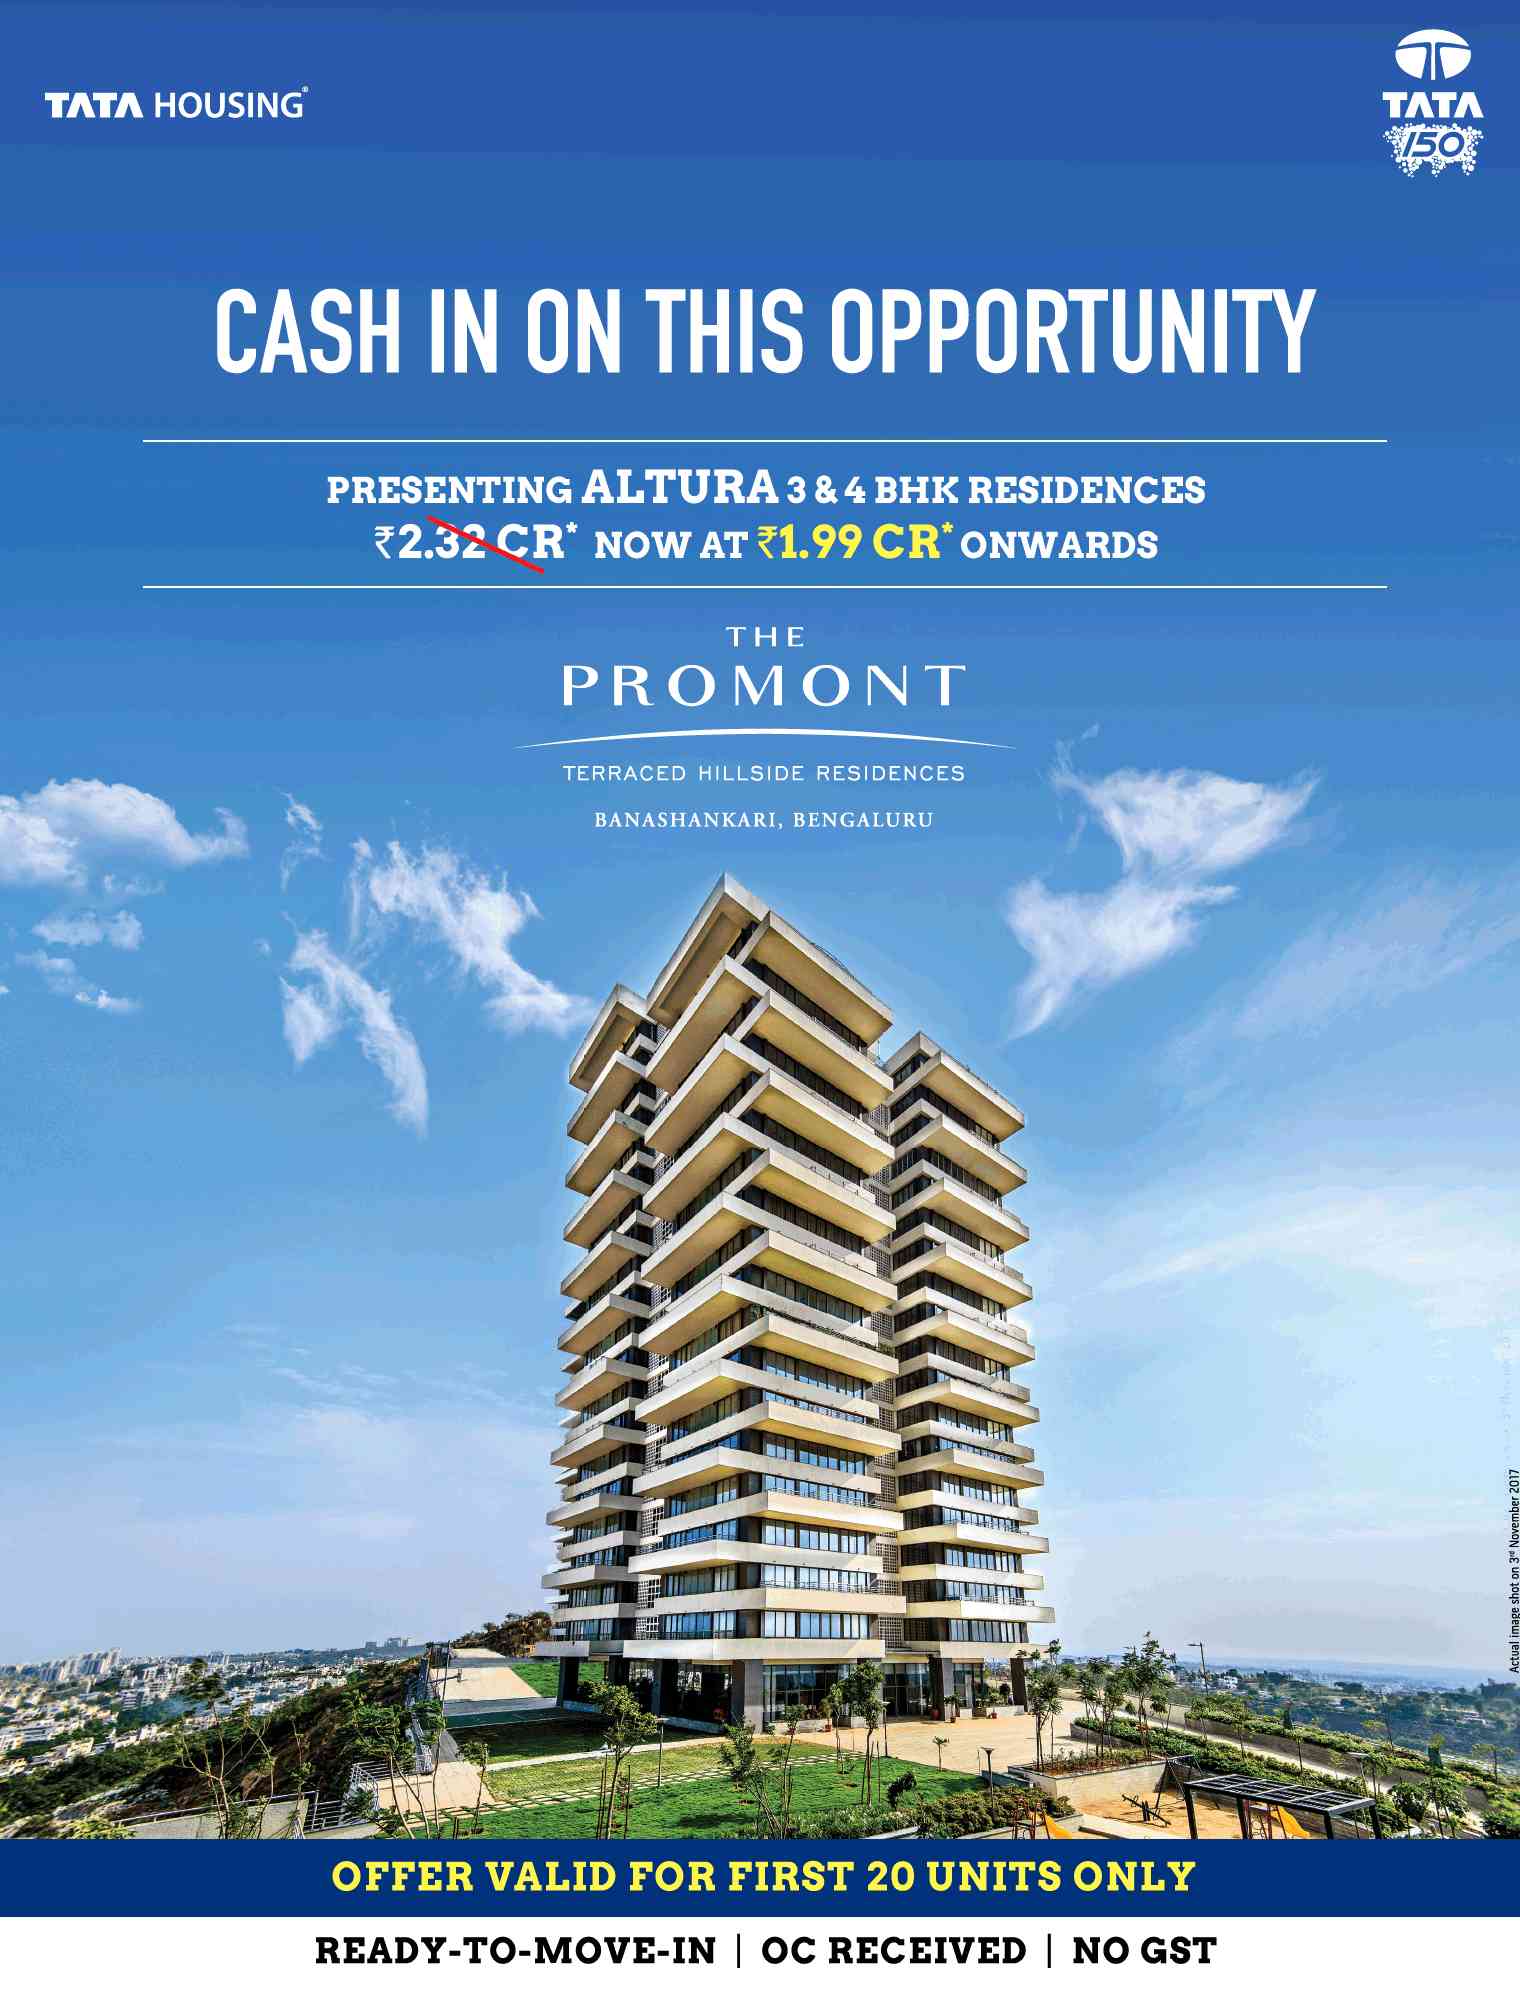 Presenting Altura 3 & 4 BHK residences @ Rs 1.99 cr at Tata The Promont in Bangalore